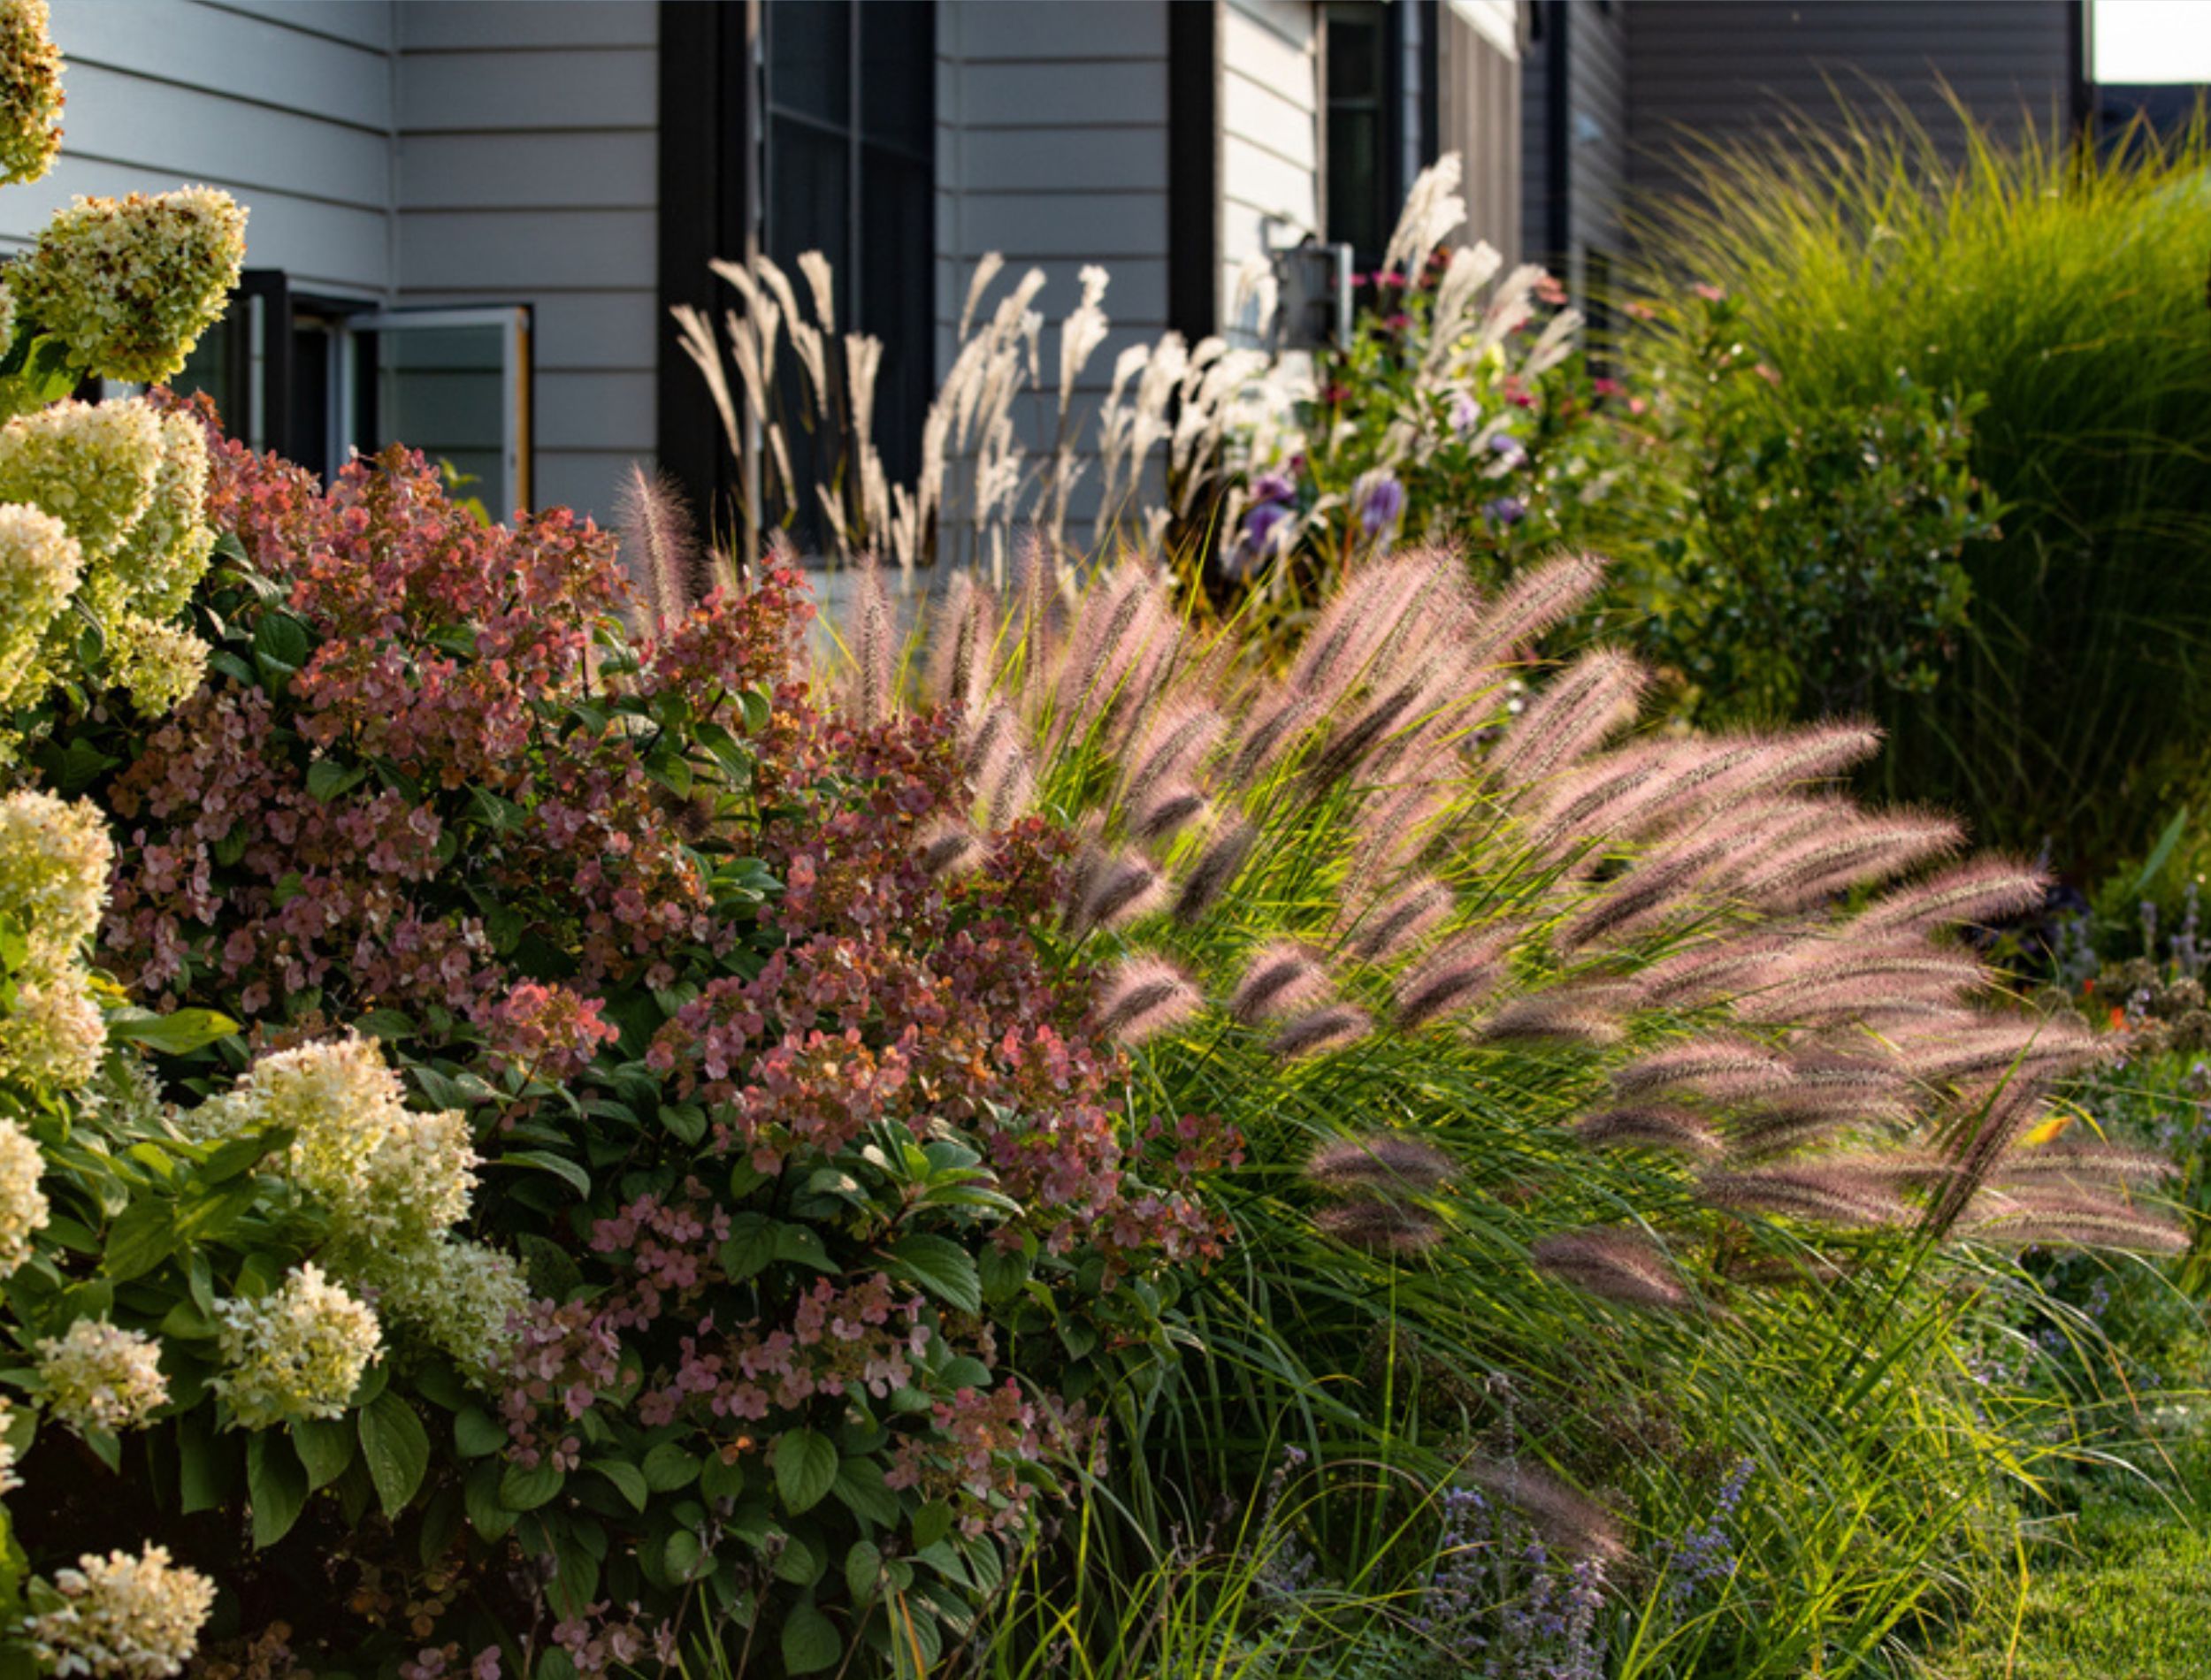 Ornamental grasses in front of house